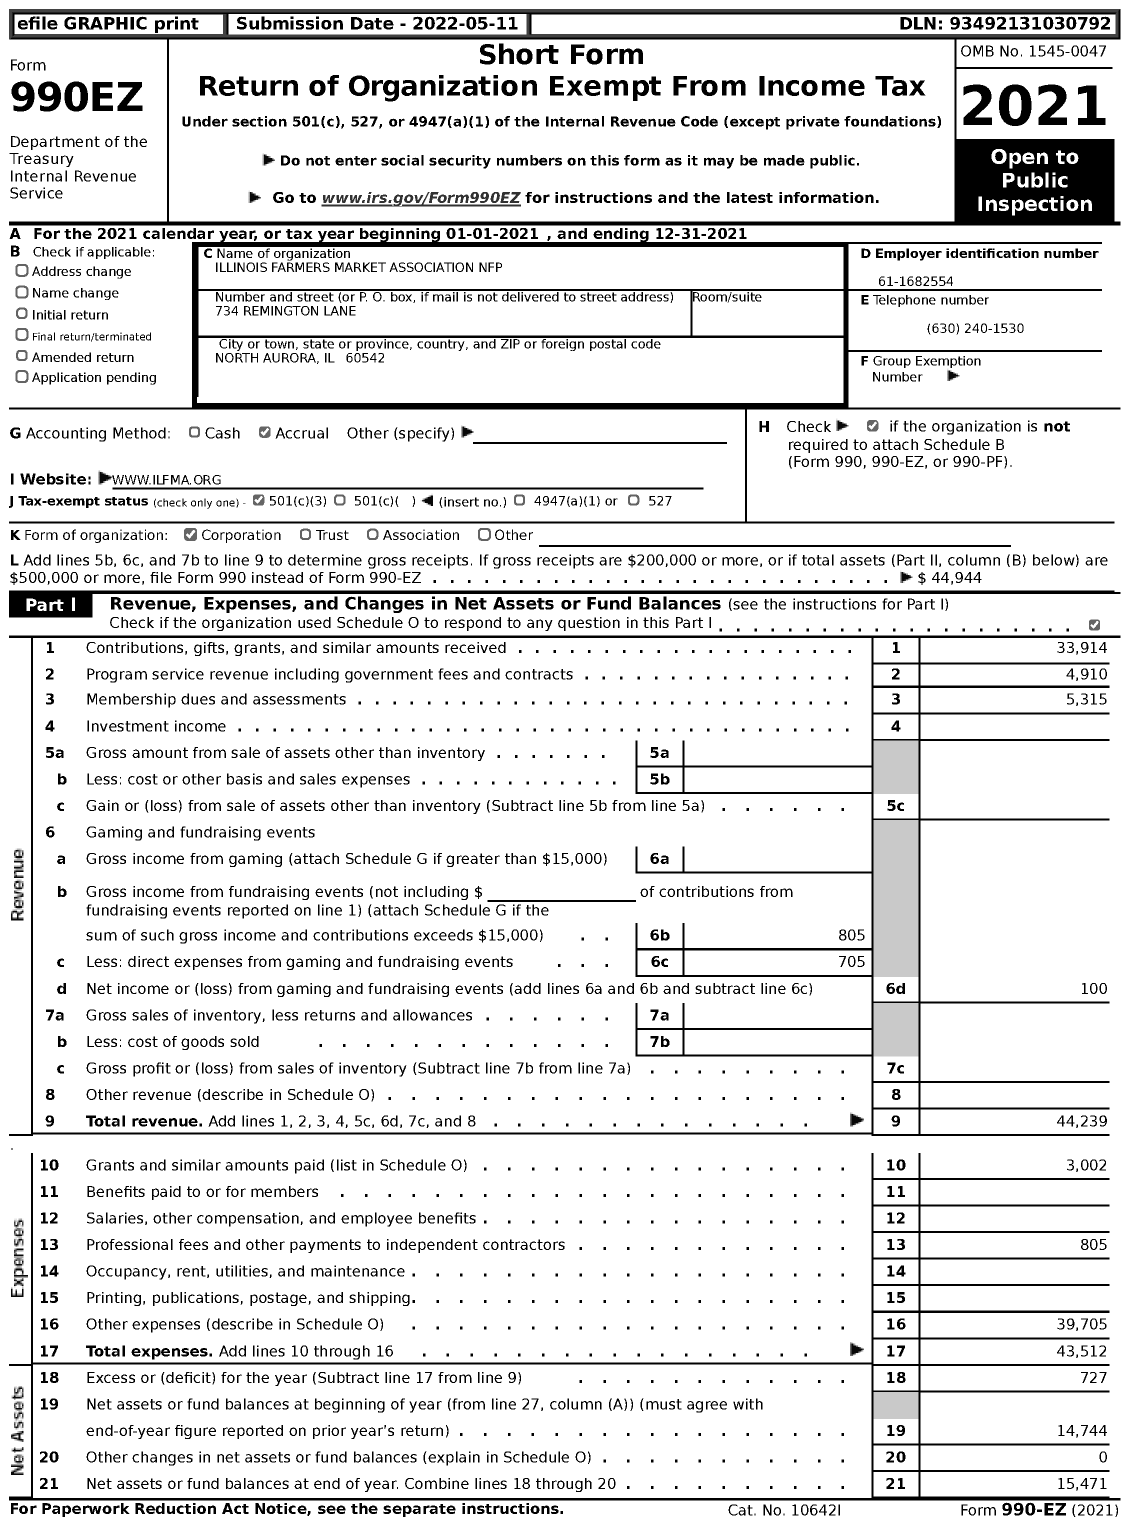 Image of first page of 2021 Form 990EZ for Illinois Farmers Market Association NFP